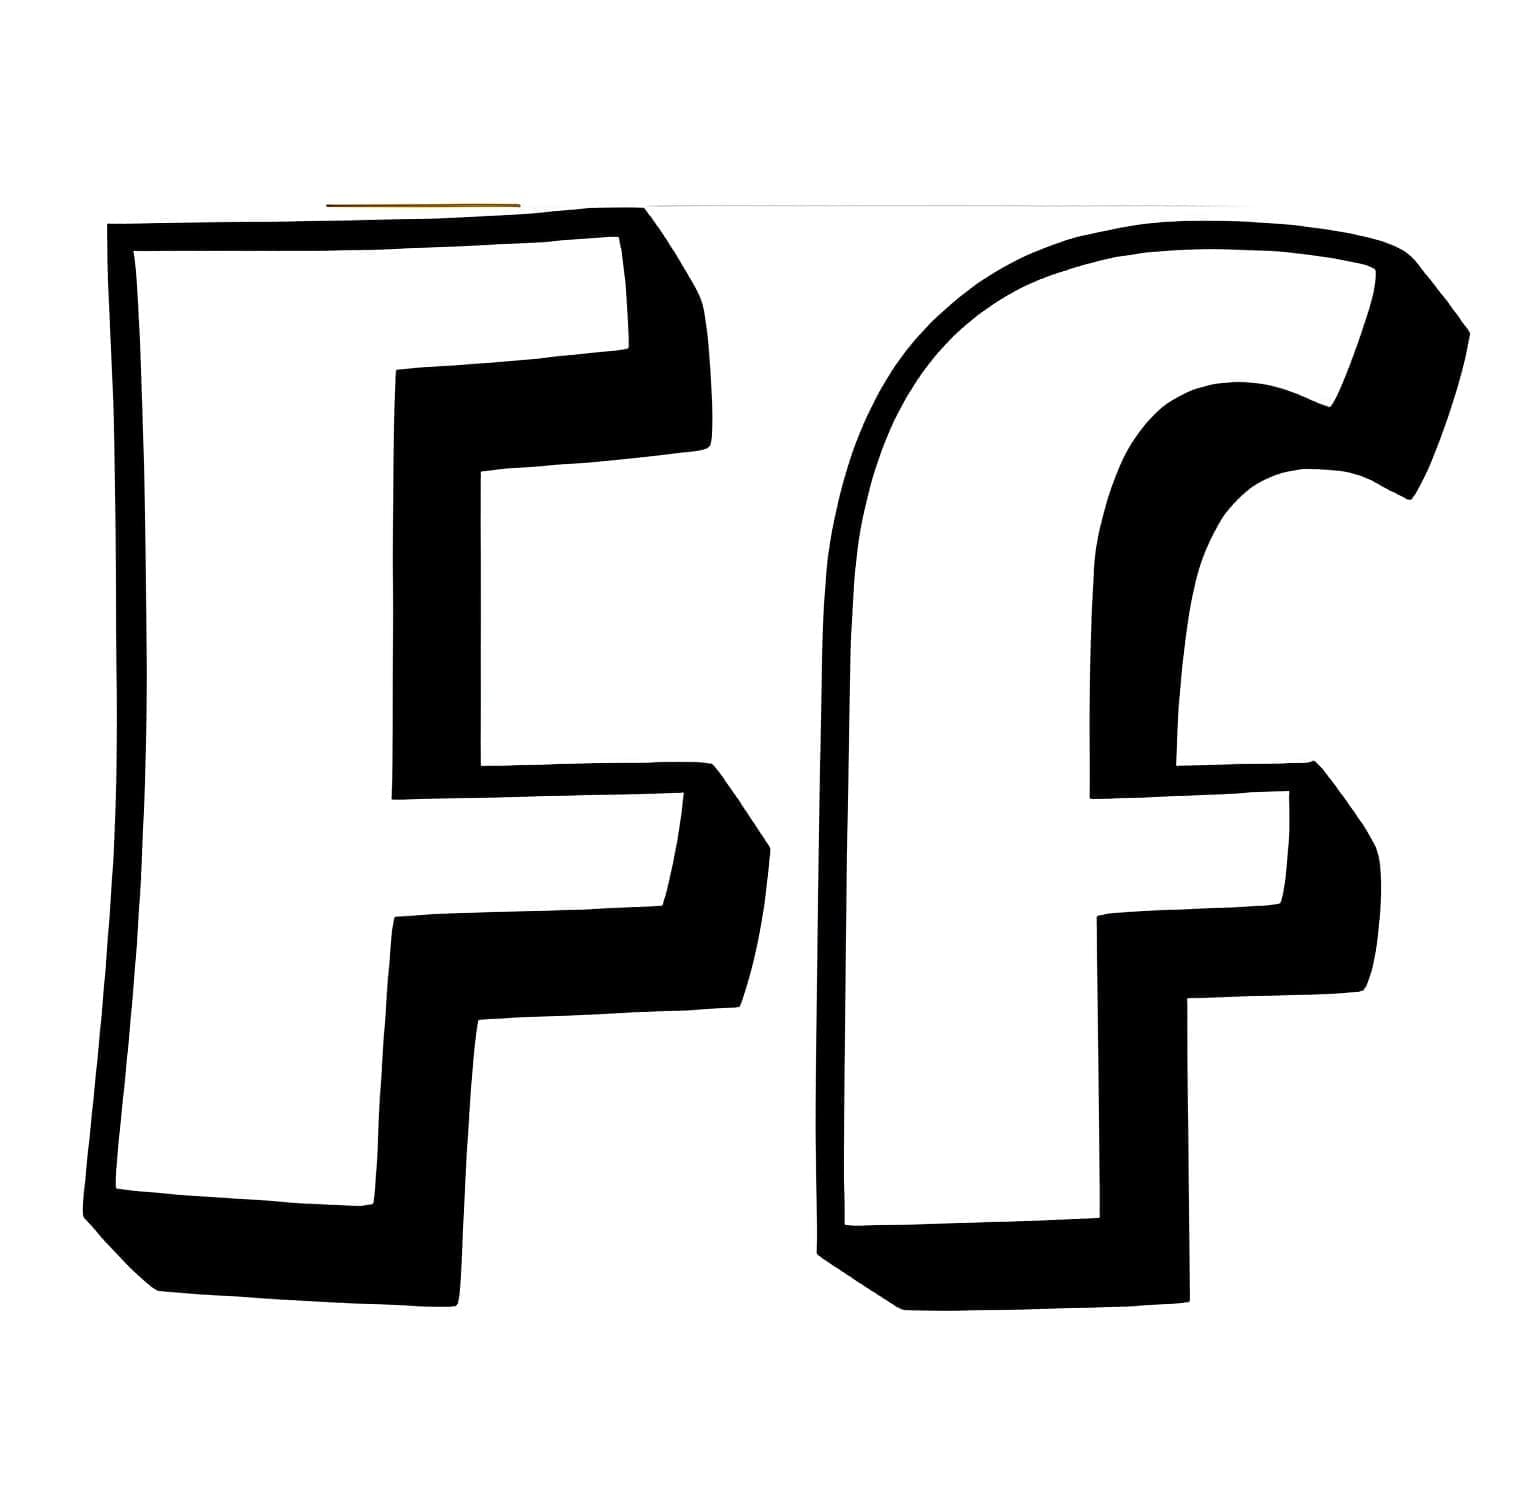 Letter F For Kids coloring page - Download, Print or Color Online for Free